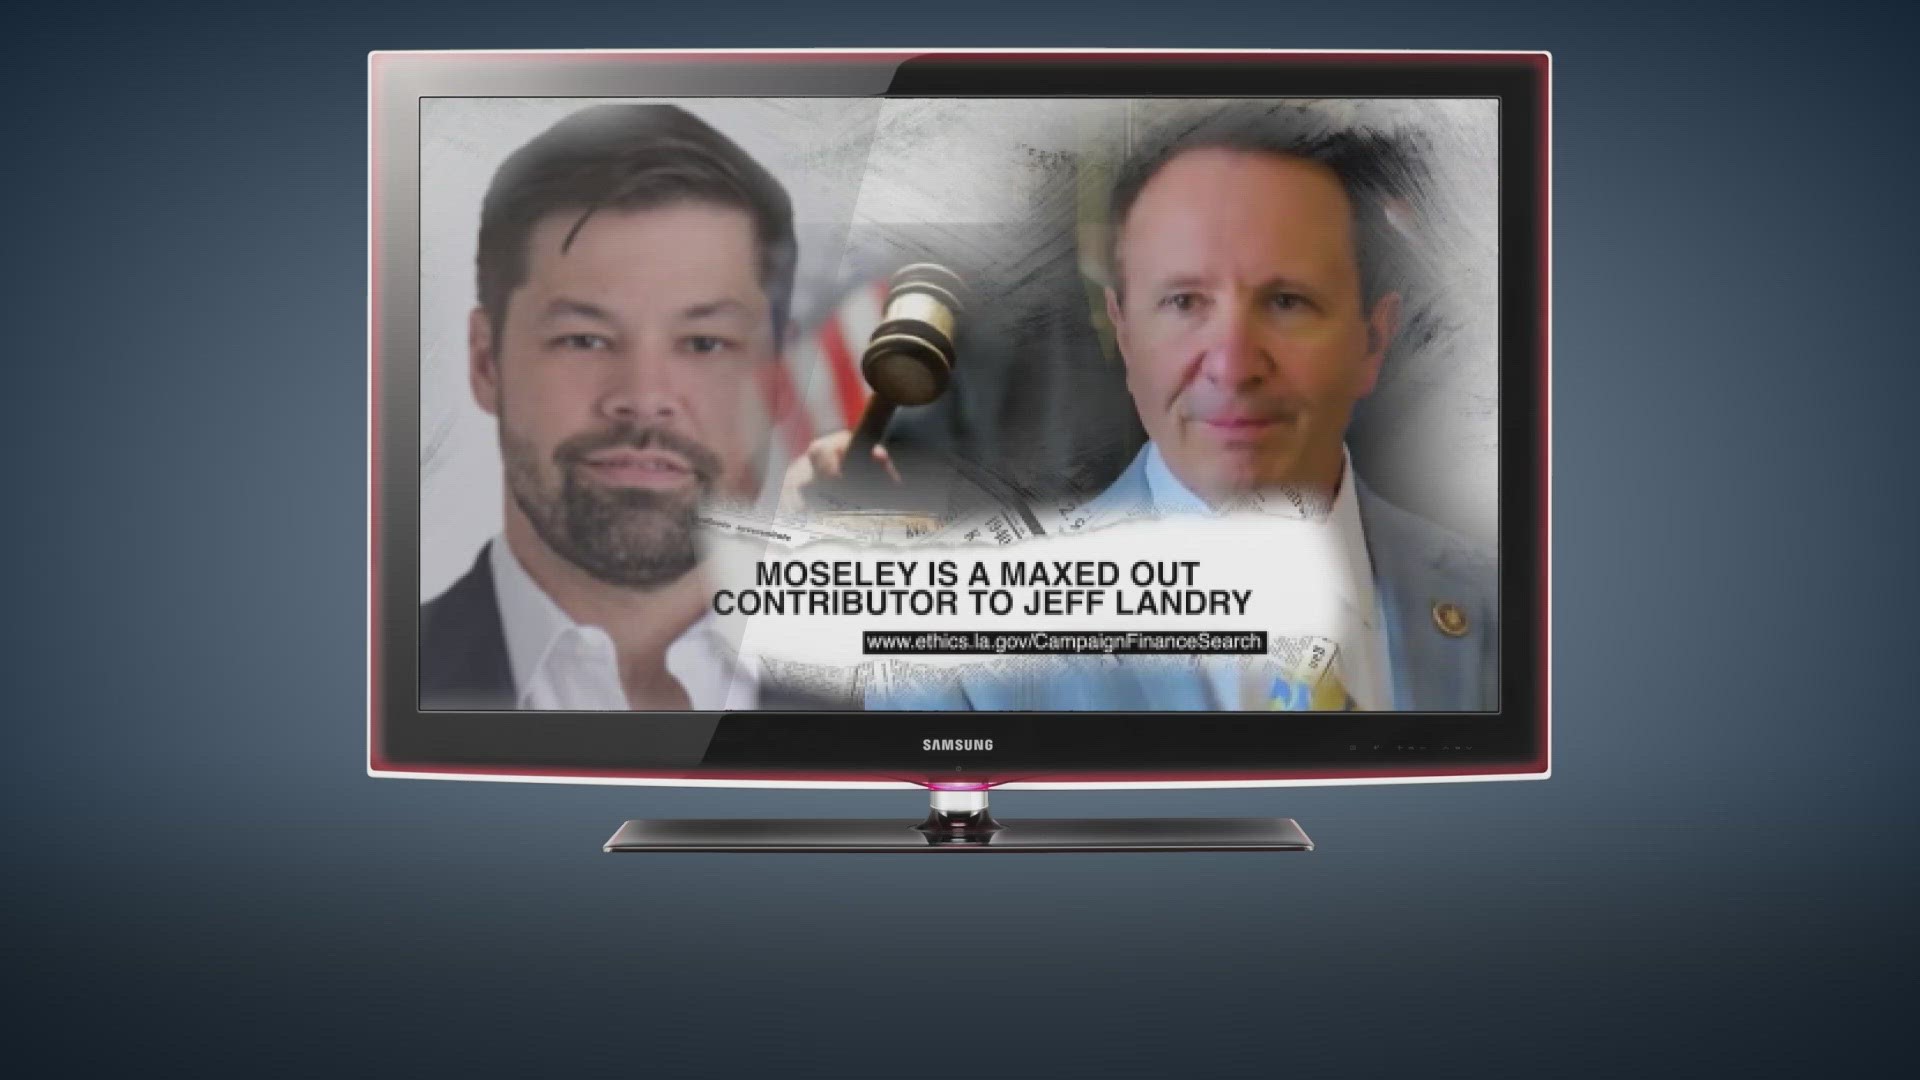 Investigator David Hammer looks at why a Texas lawyer has given a campaign donation to Jeff Landry, Louisiana's attorney general and a candidate for governor.